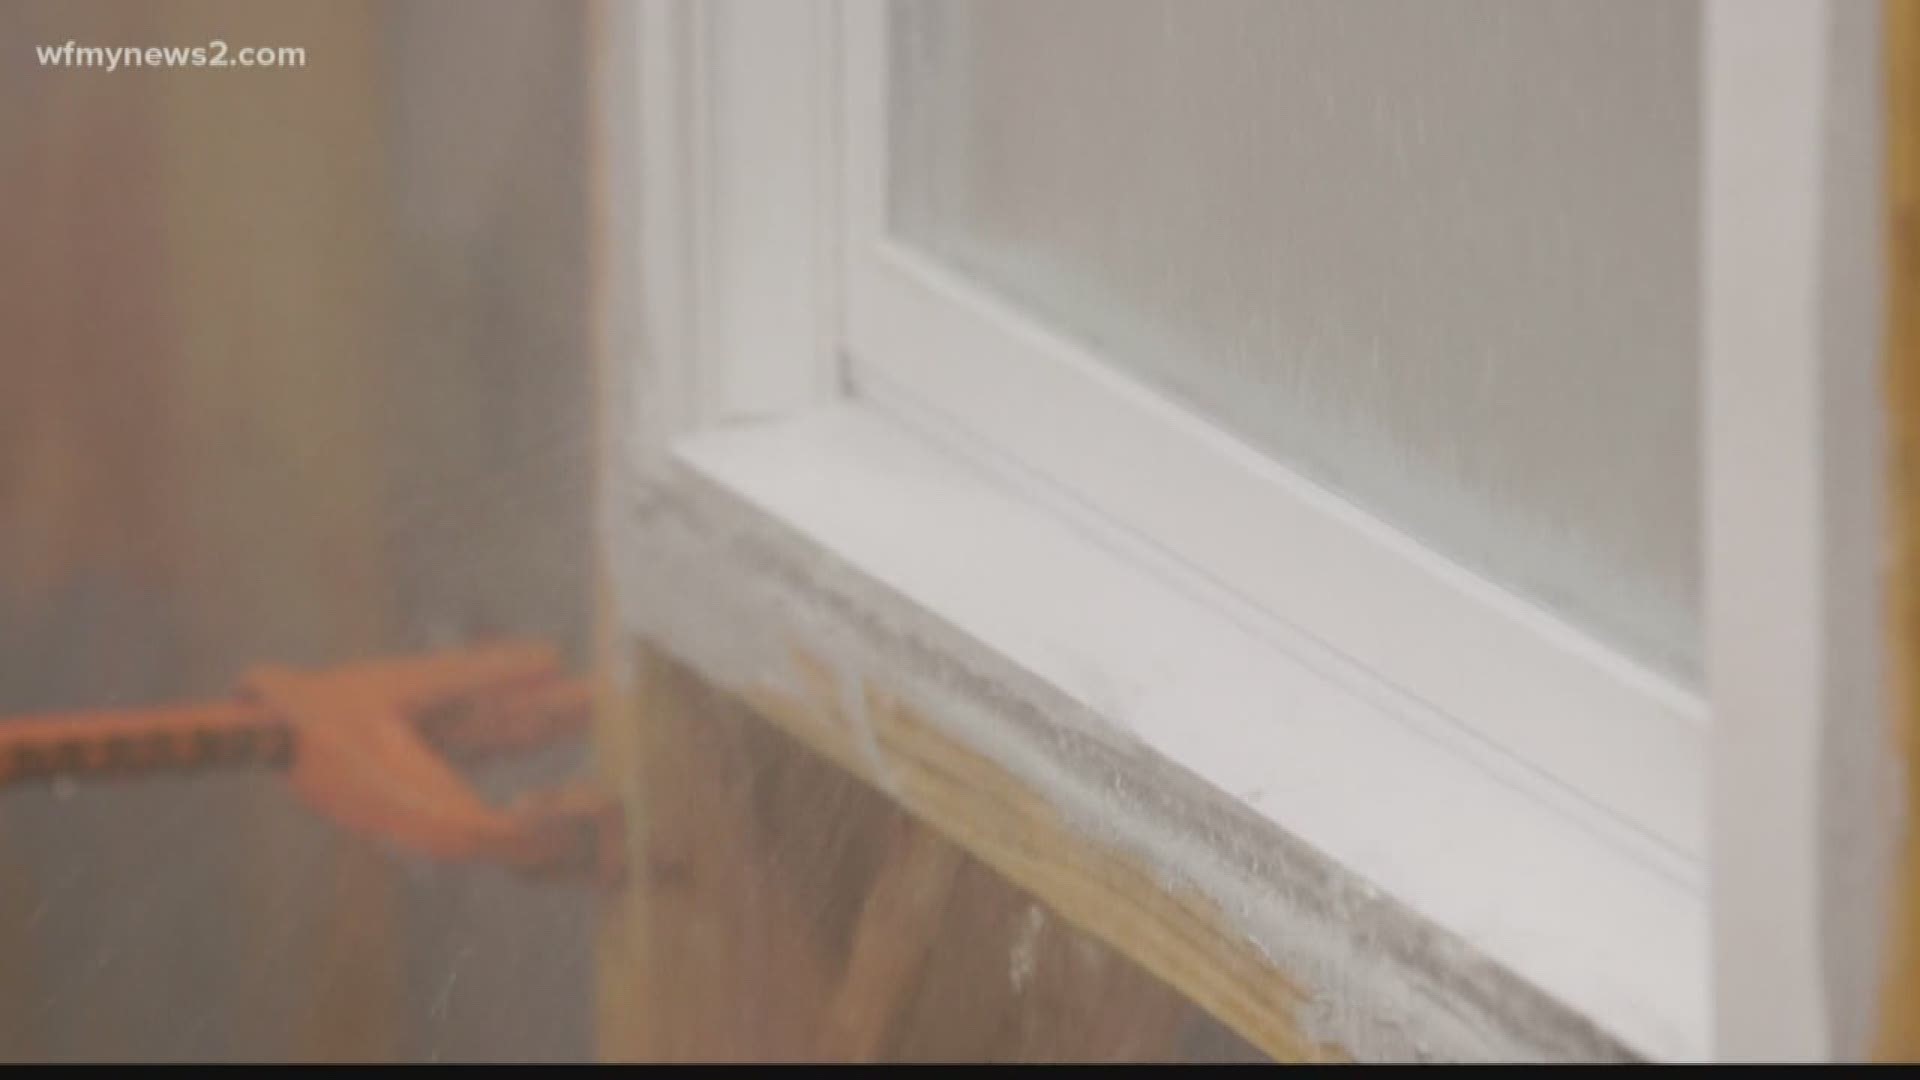 Consumer Reports did testing to find some of the best window replacements out there.